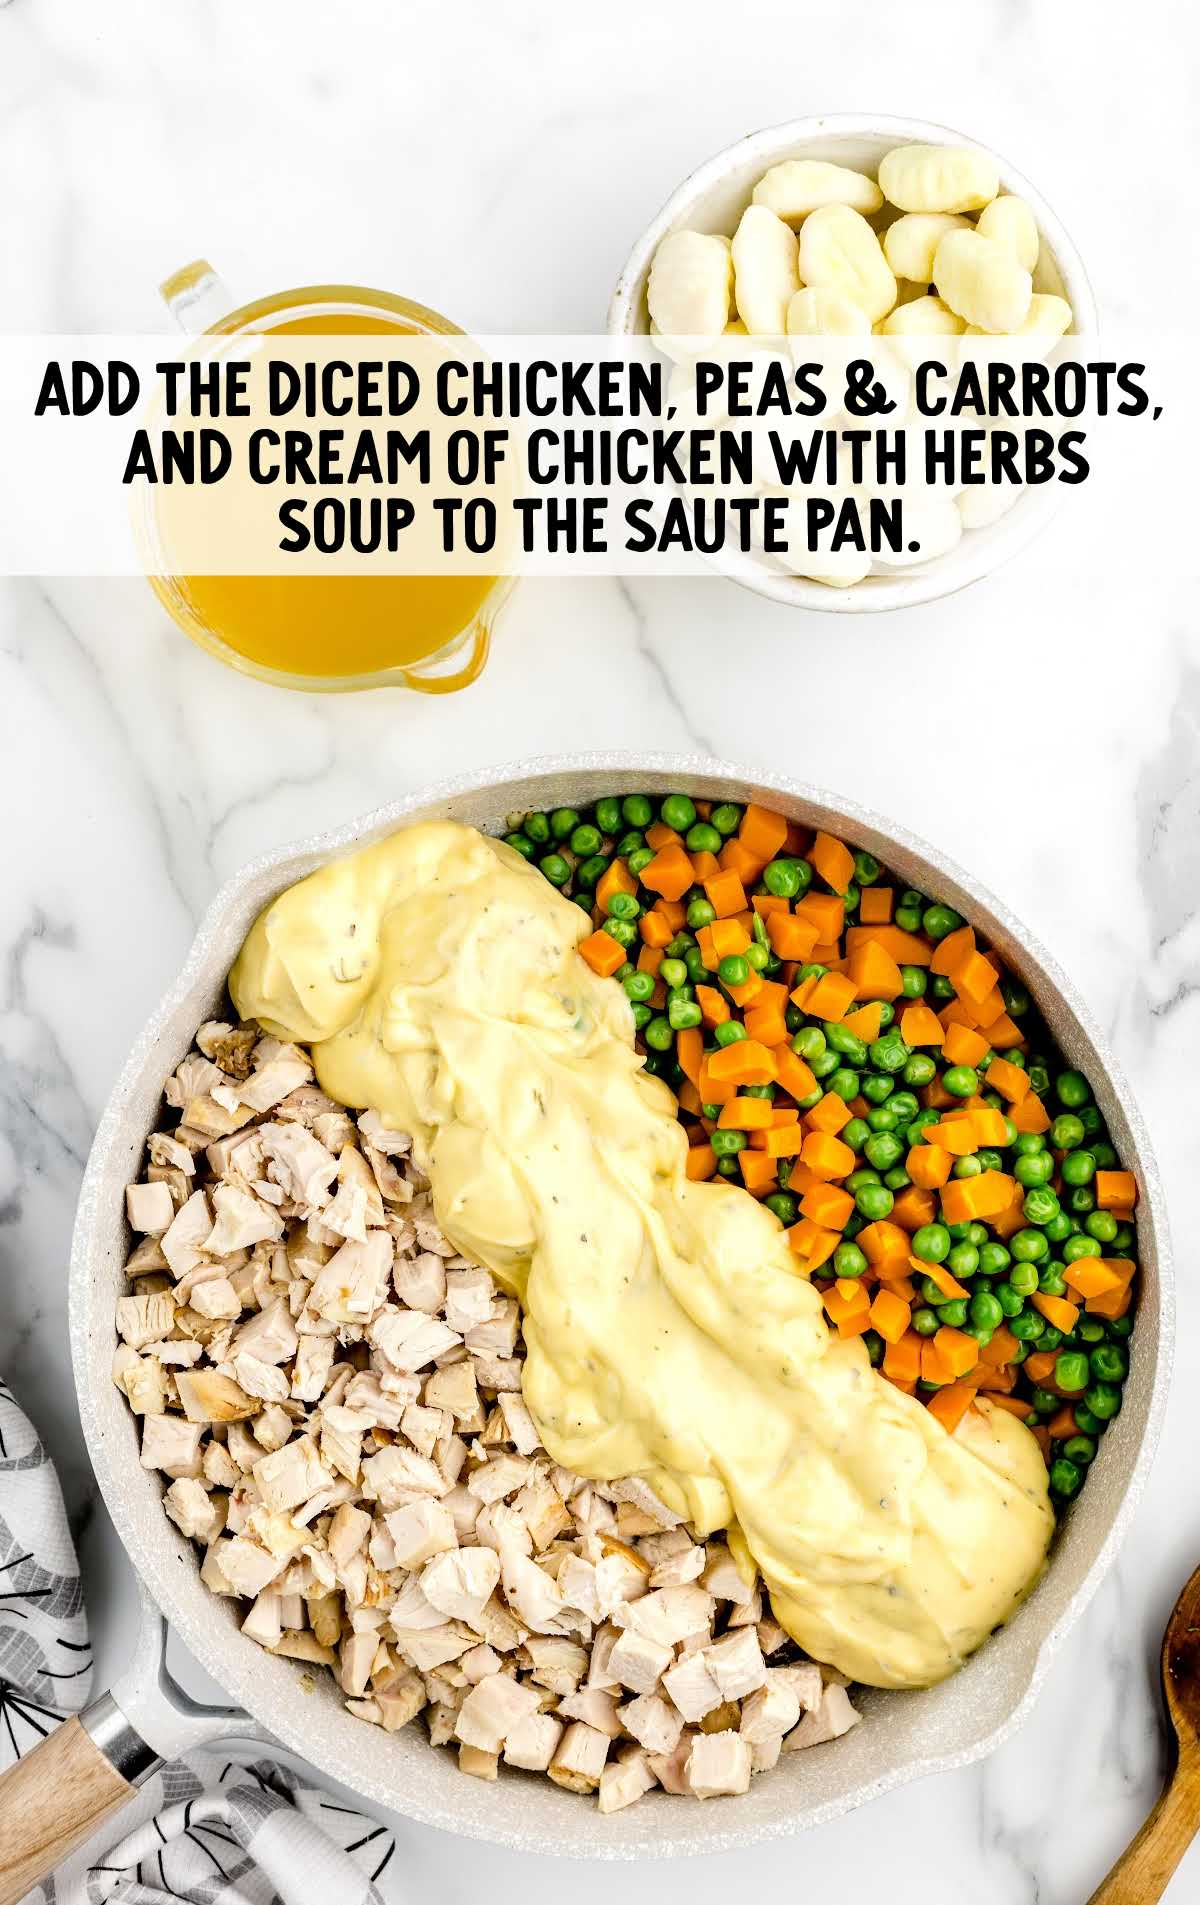 diced chicken, peas, and carrots, and cream of chicken with herbs soup added to the saute pan